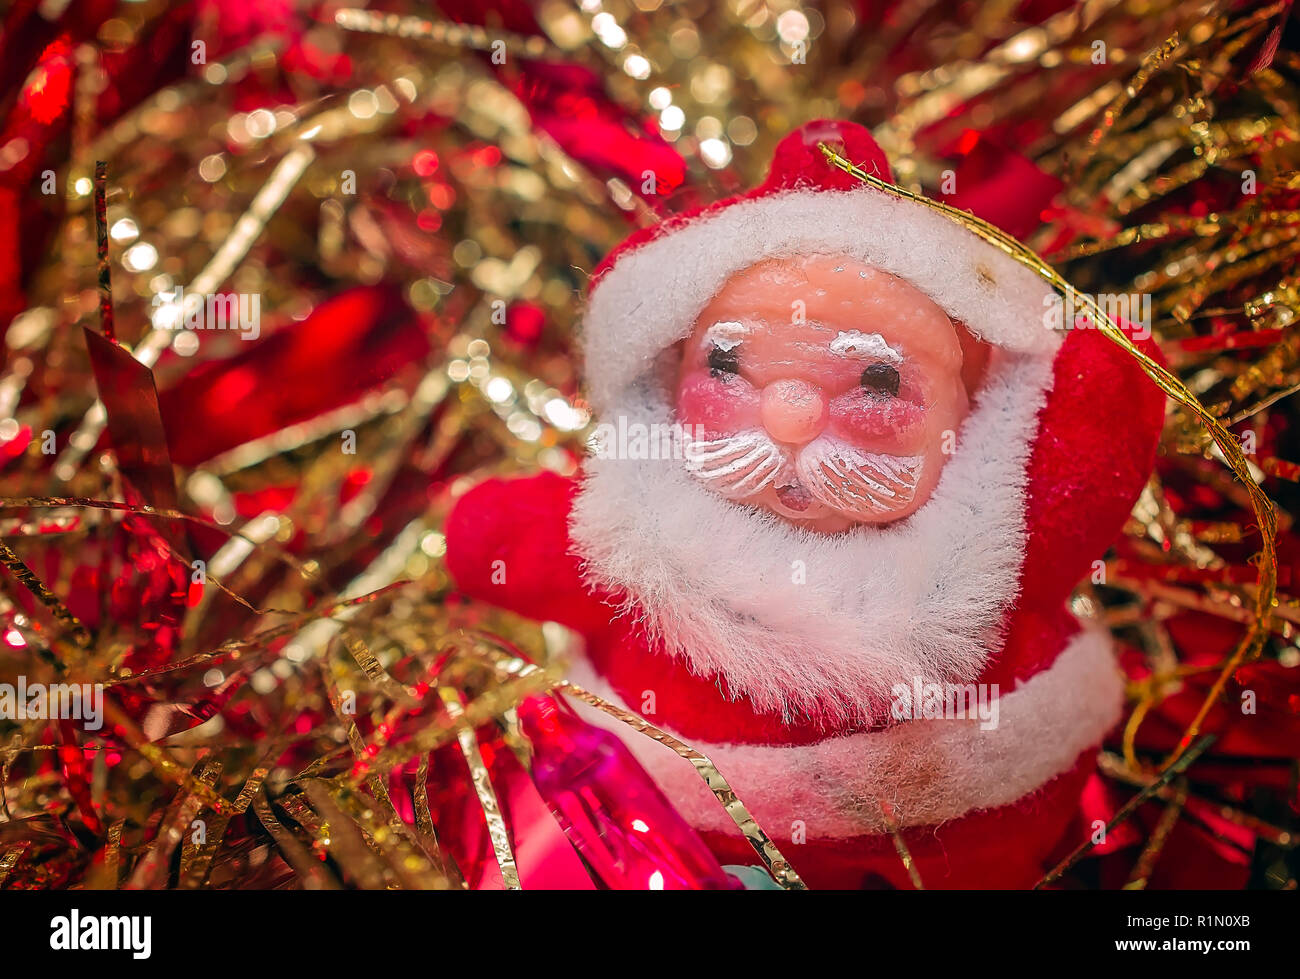 A vintage 1950's-1960's Christmas Santa ornament is pictured, December 31, 2015, in Coden, Alabama. Stock Photo